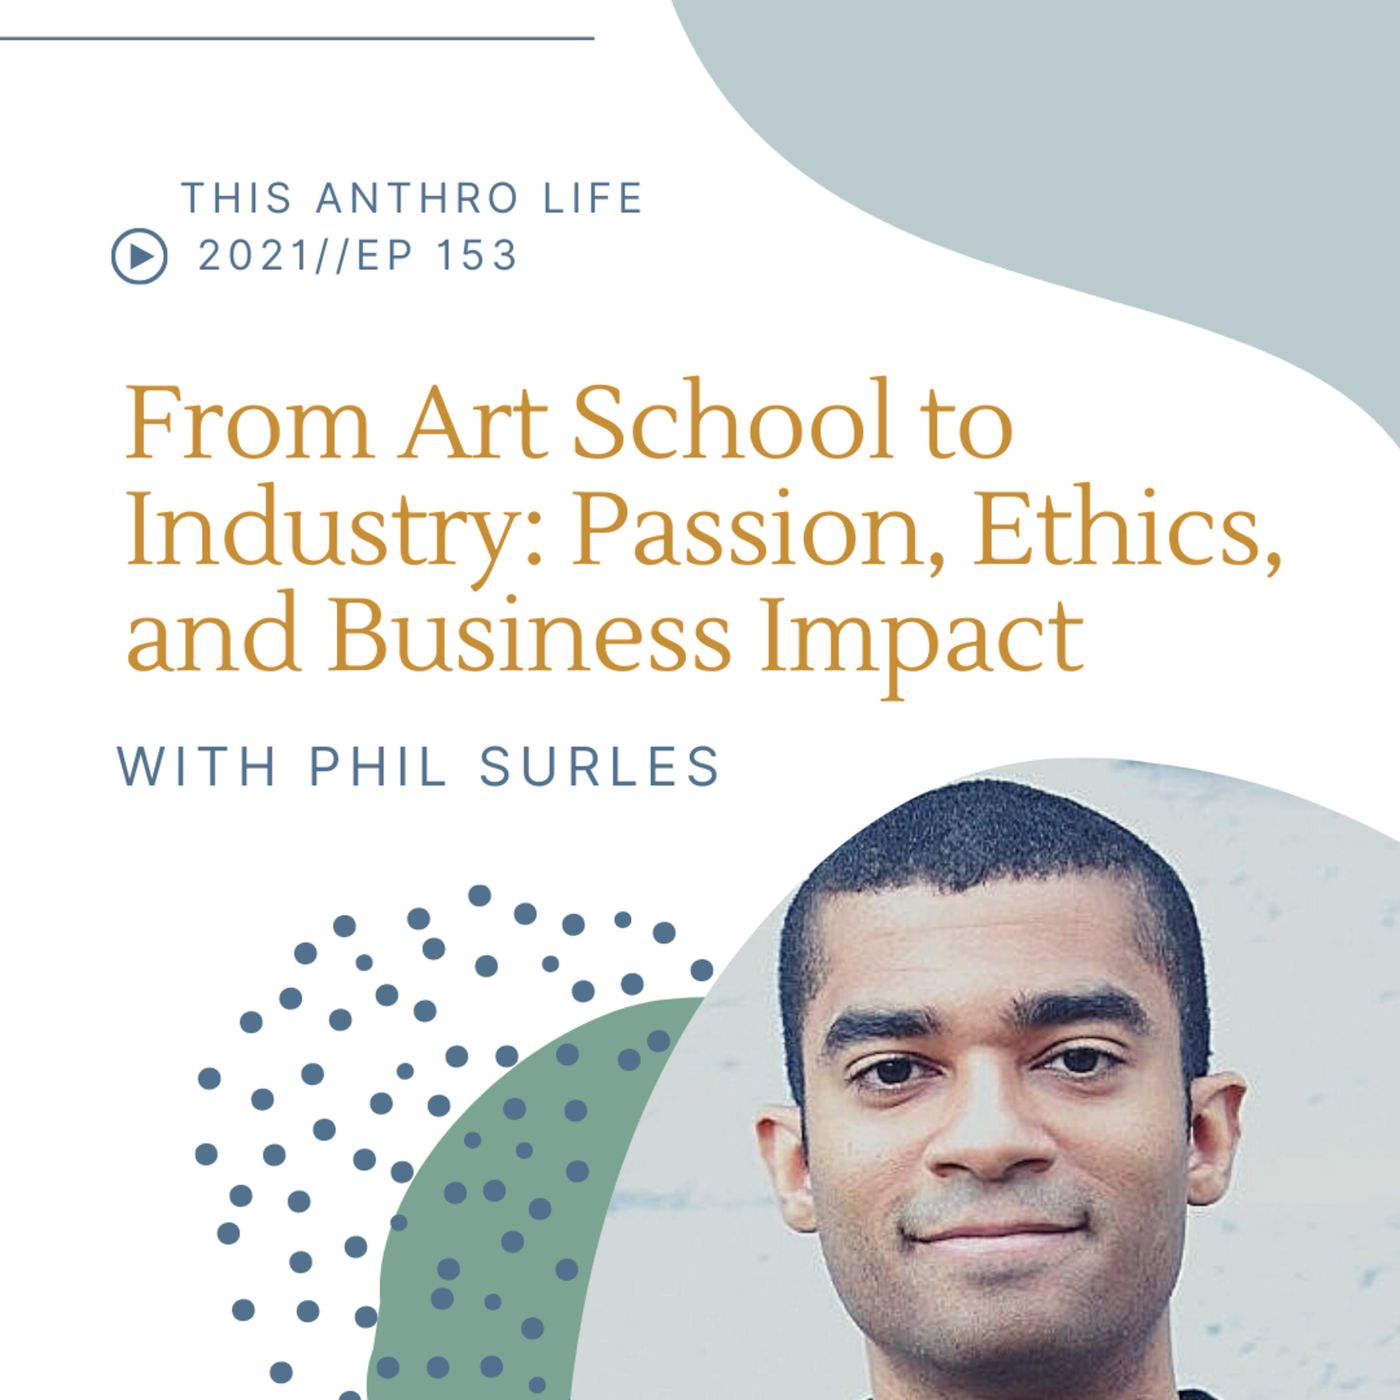 From Art School to Industry: Passion, Ethics, and Business Impact with Phil Surles